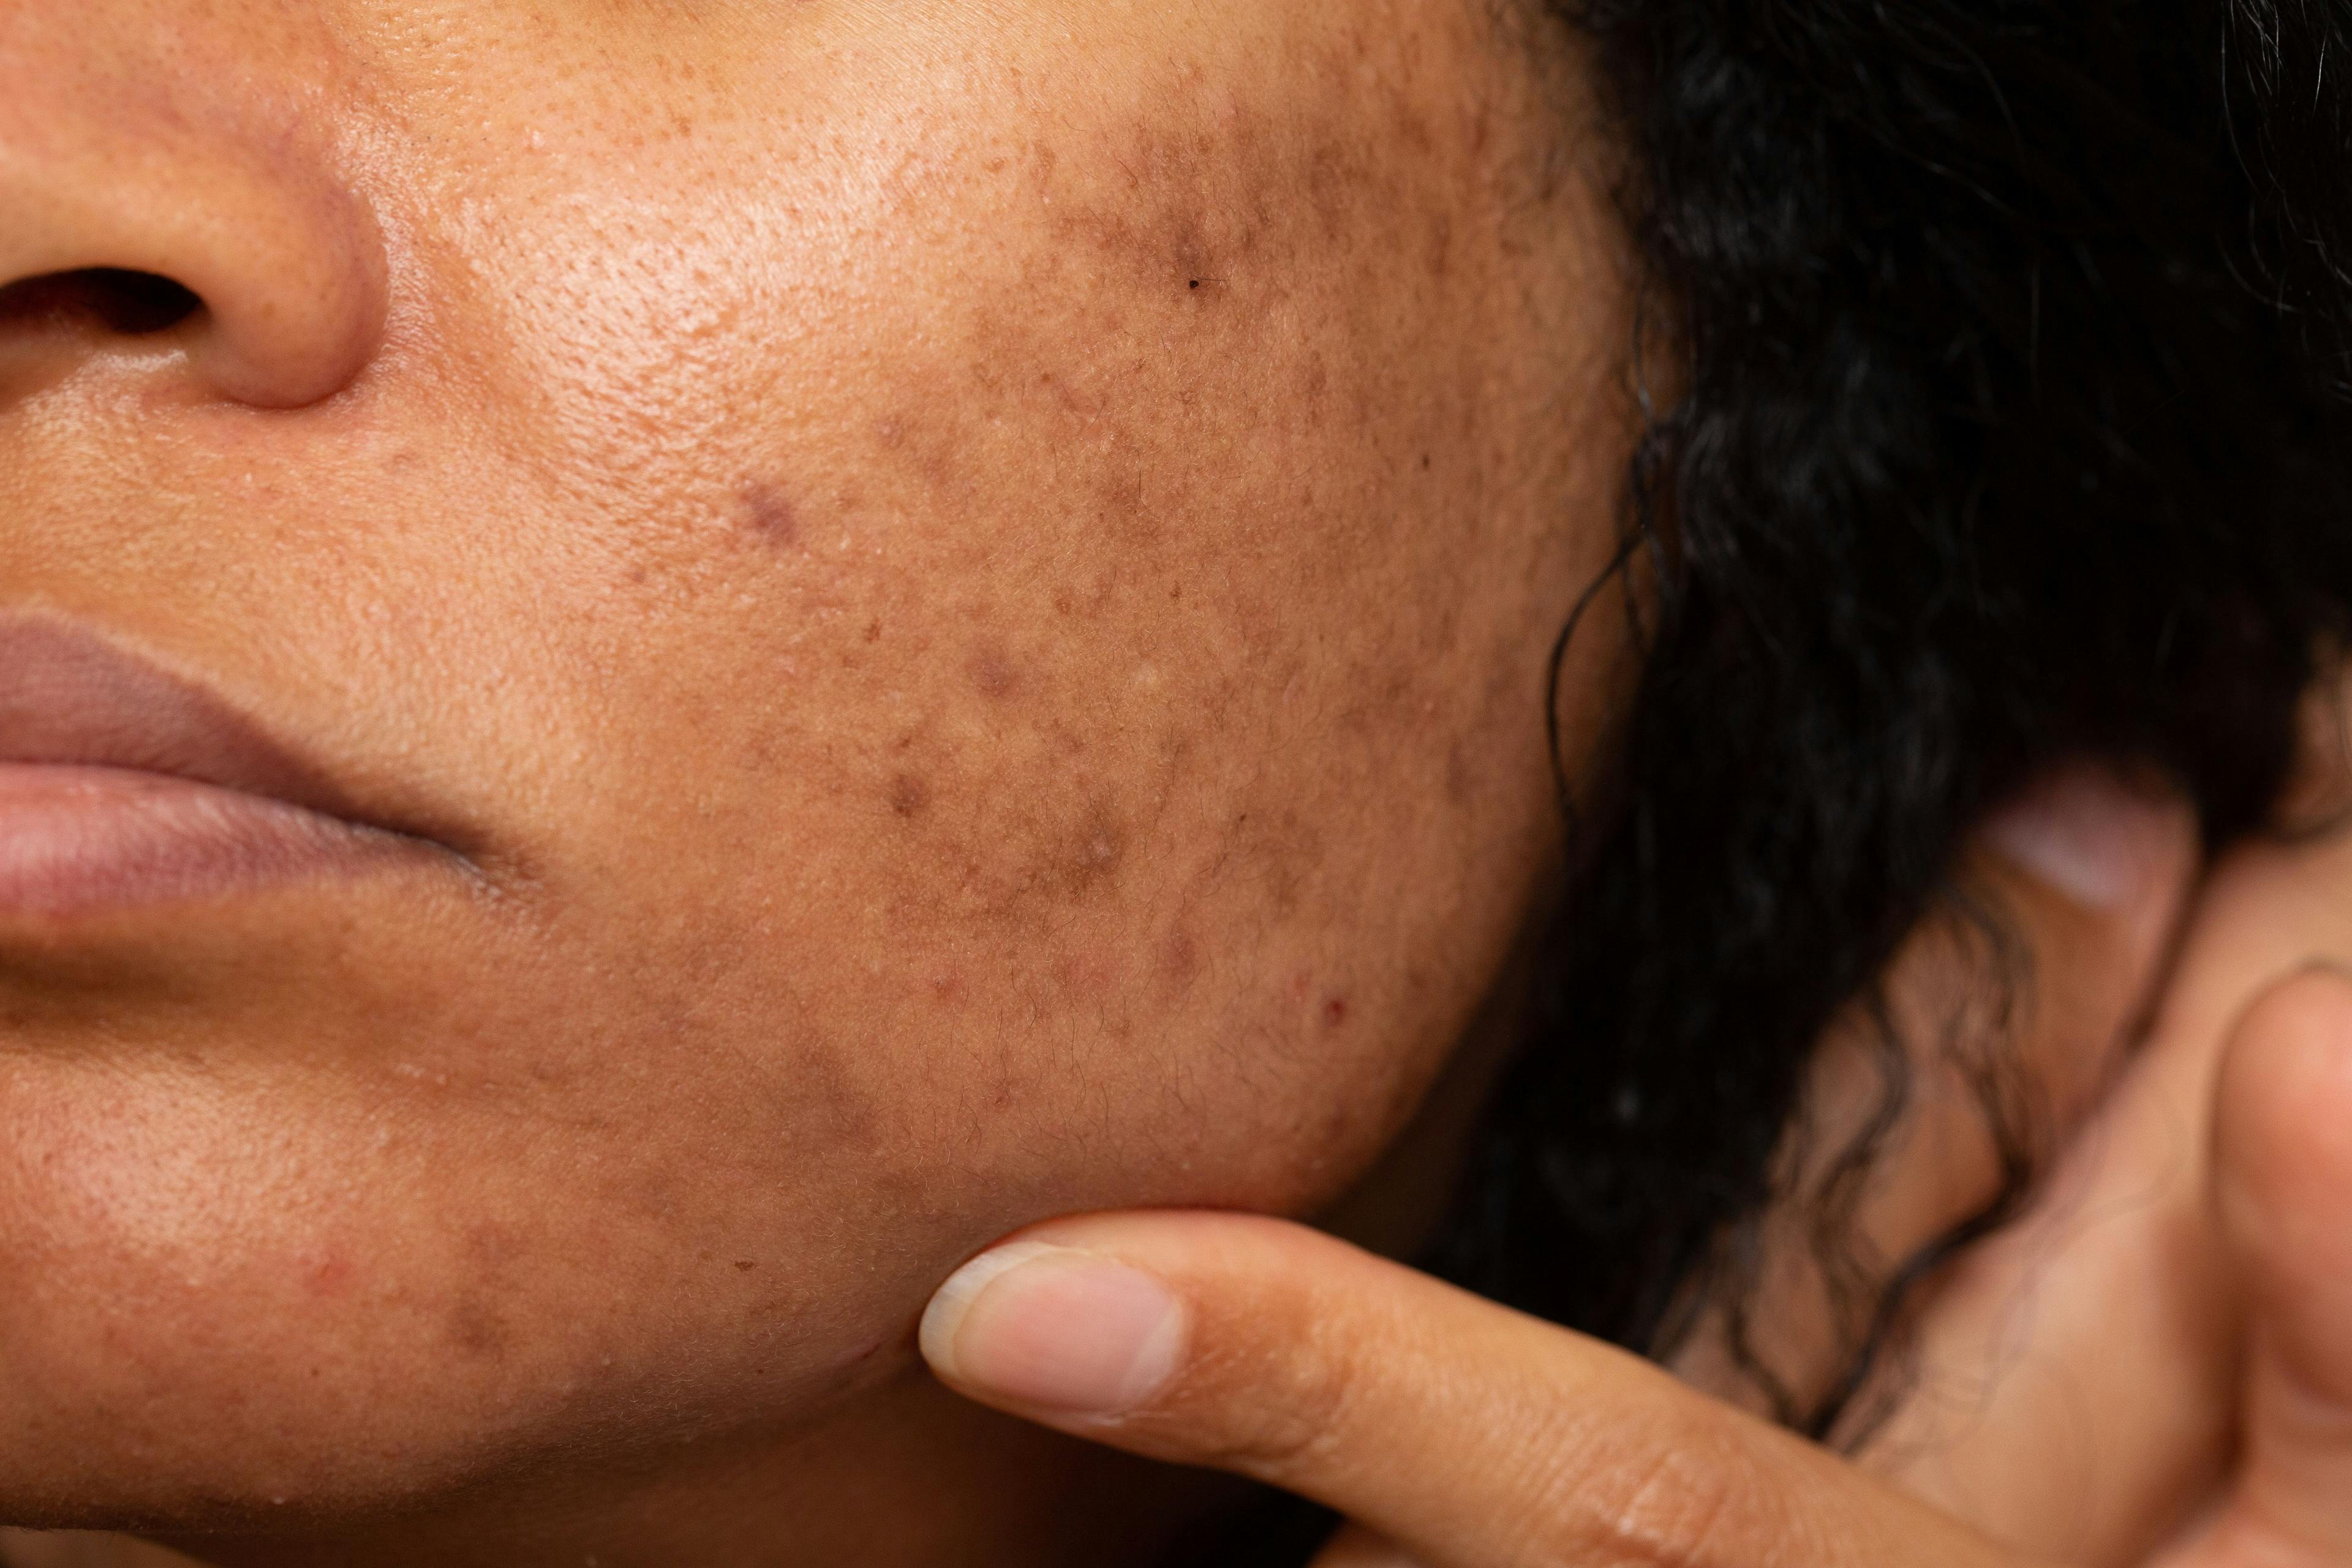 Reviewing Common Facial, Bodily Pigmented Dermatoses in Varying Clinical Presentations